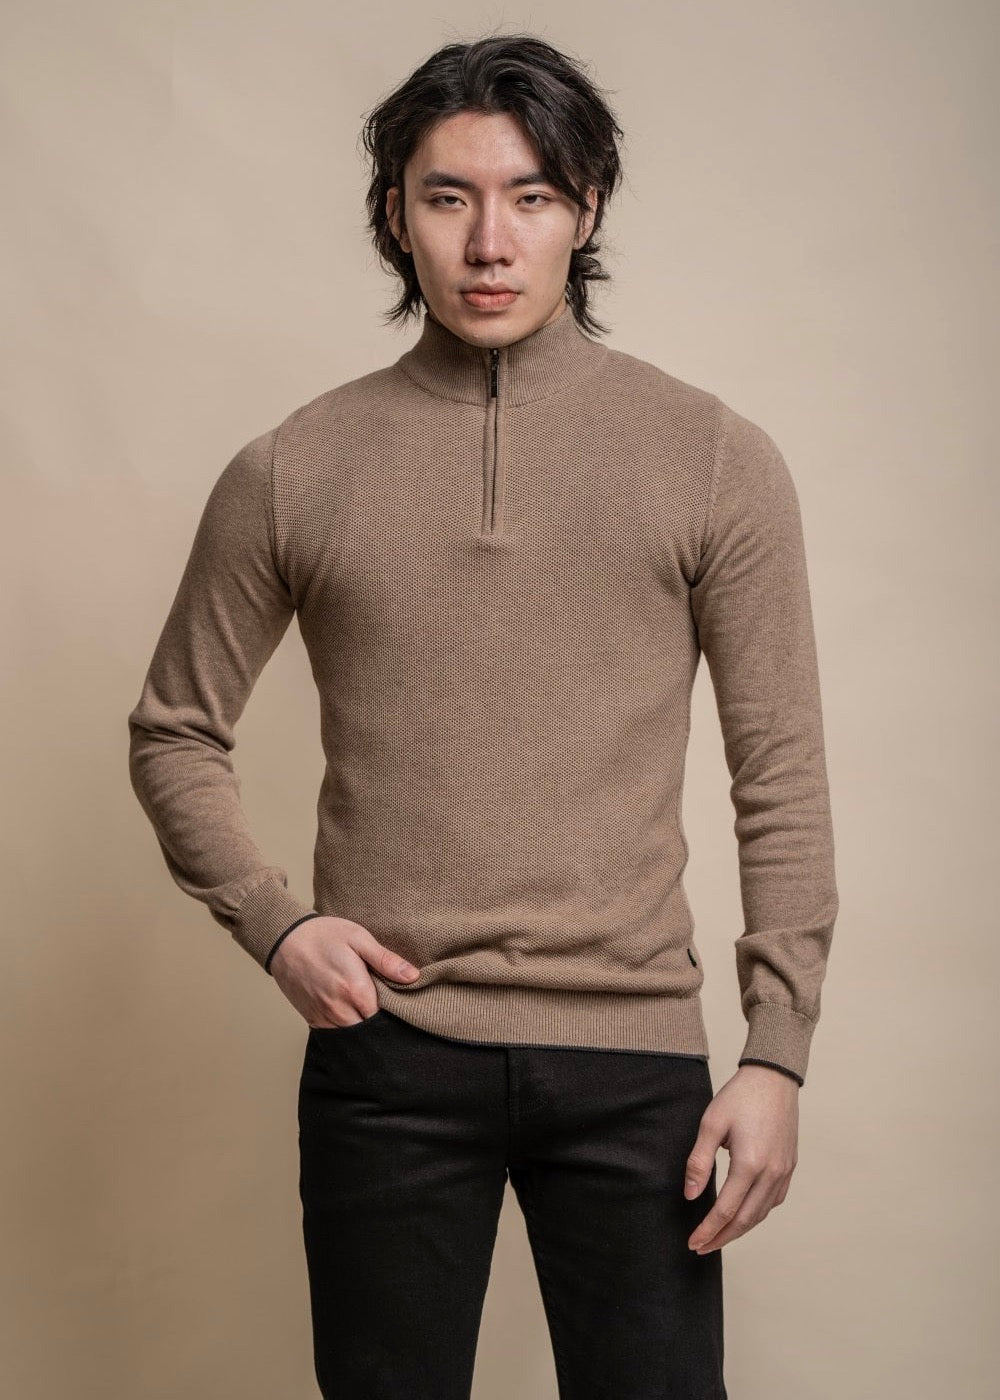 Fawn colour knitted jumper for men with half-zip, showing front.